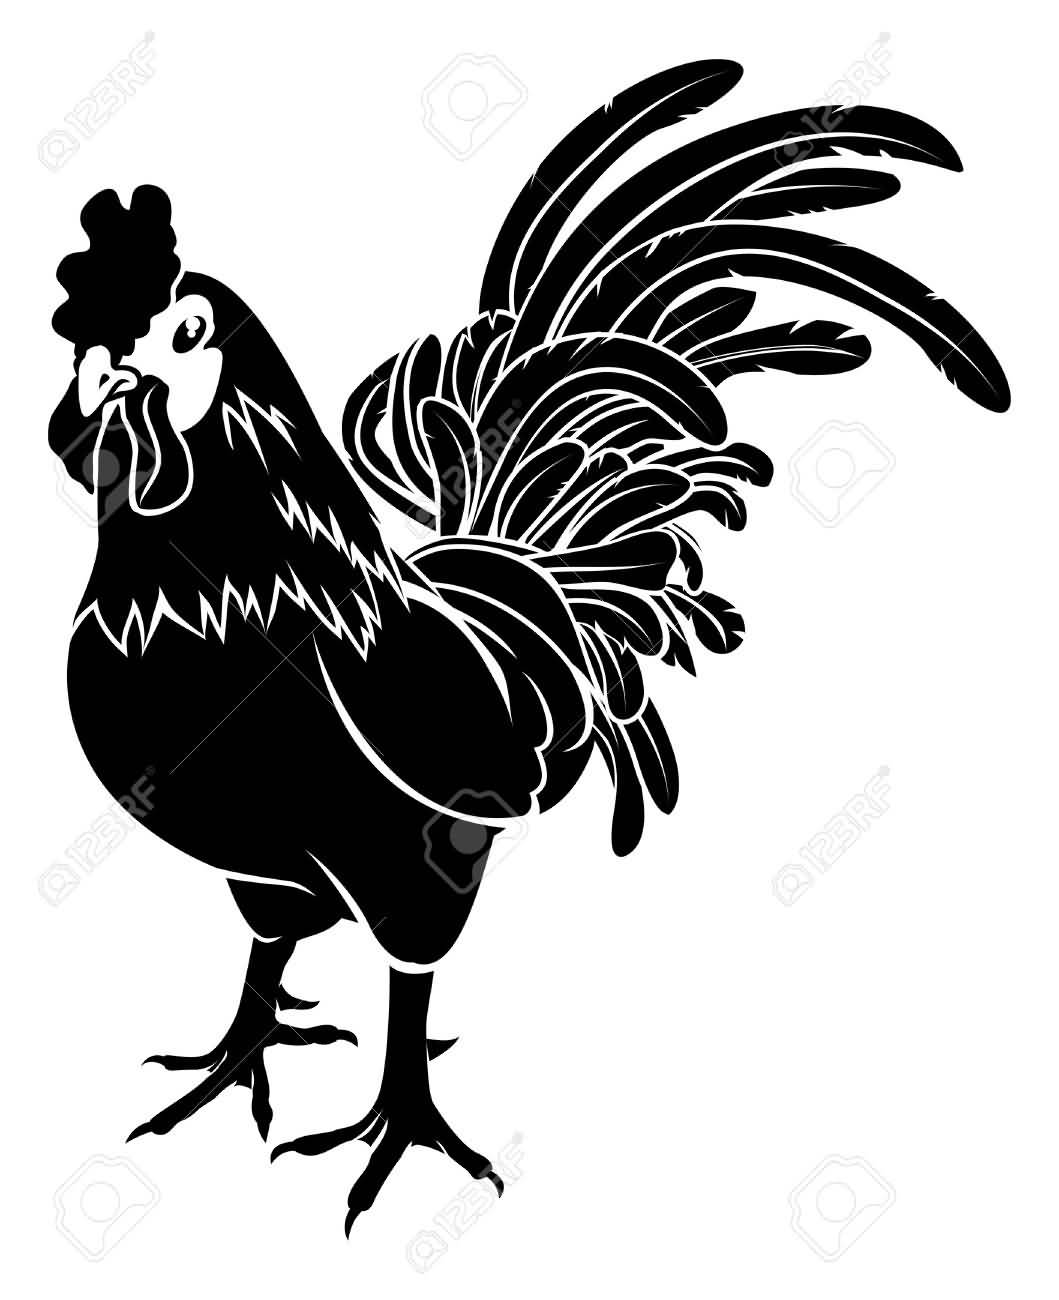 Black Silhouette Rooster Tattoo Design Sample